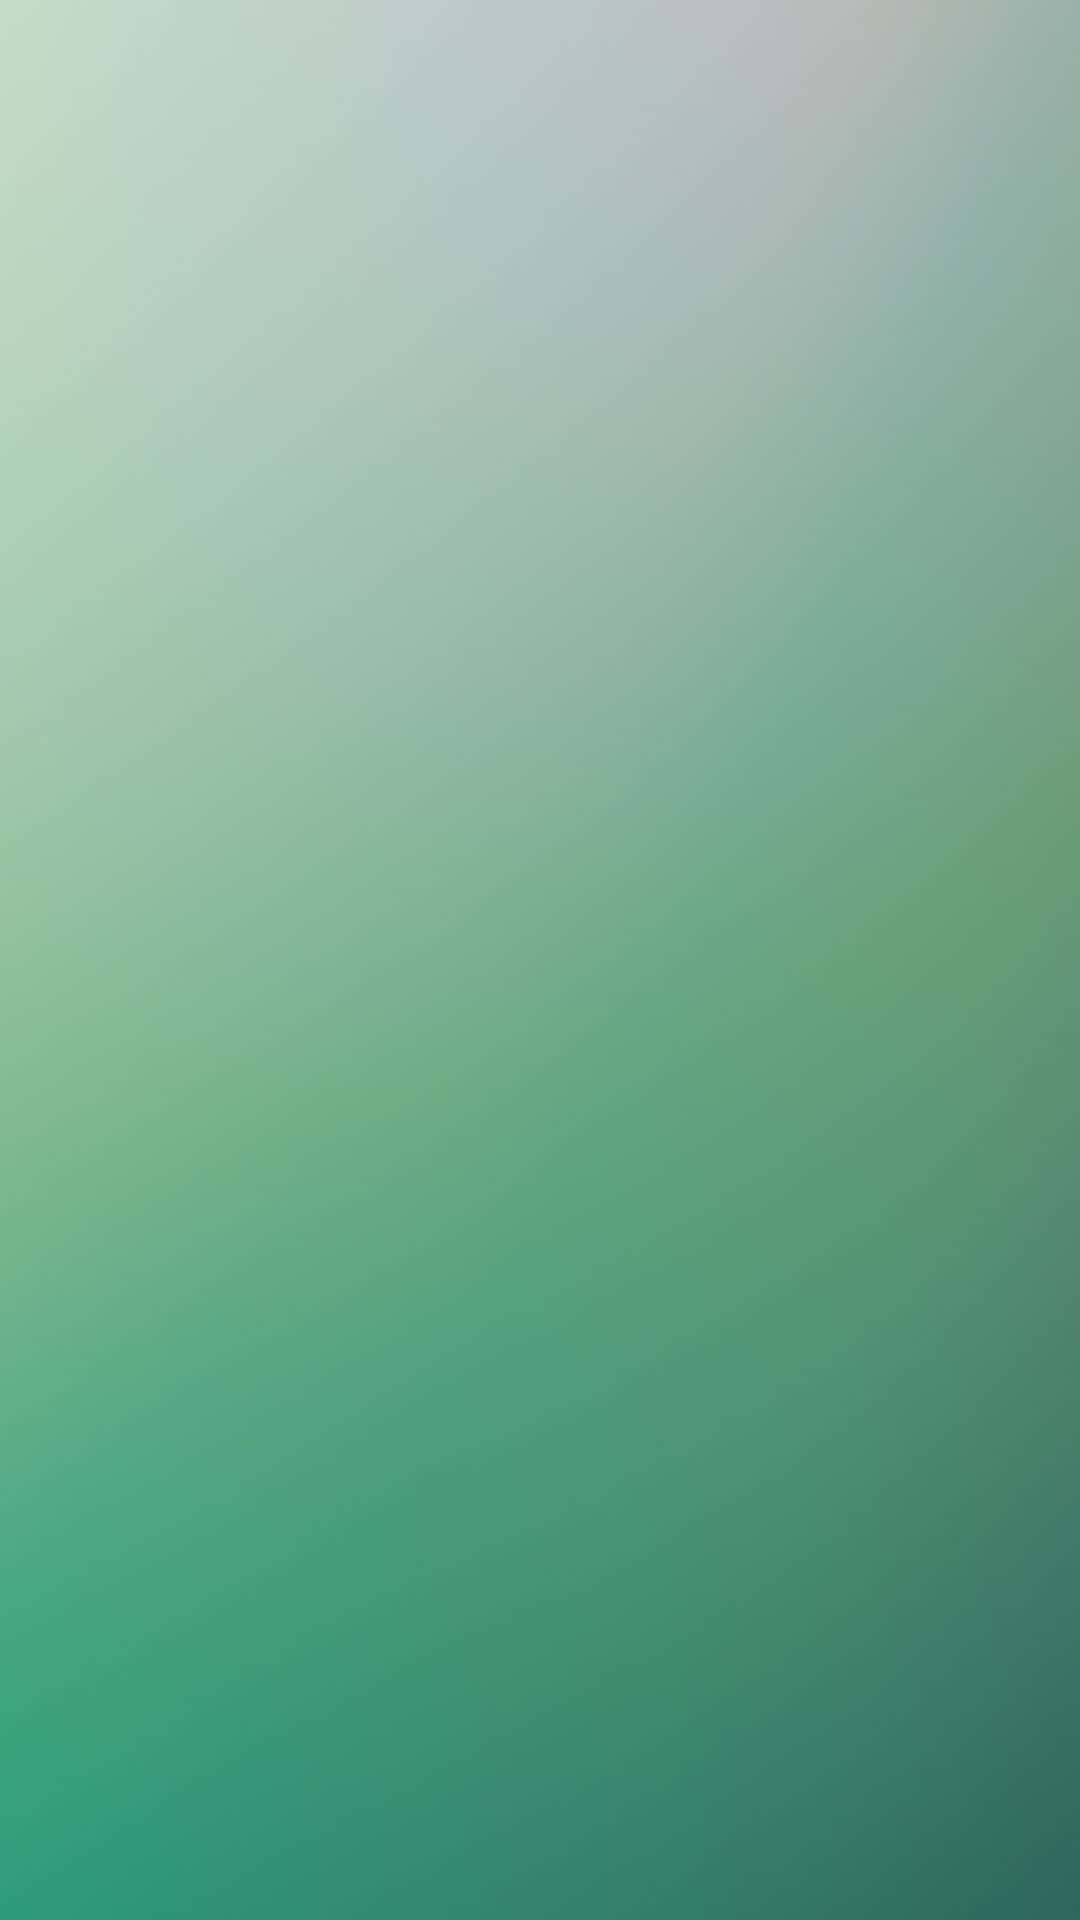 Stunning Green Gradient Background – An Engrossing Visual Stimulation